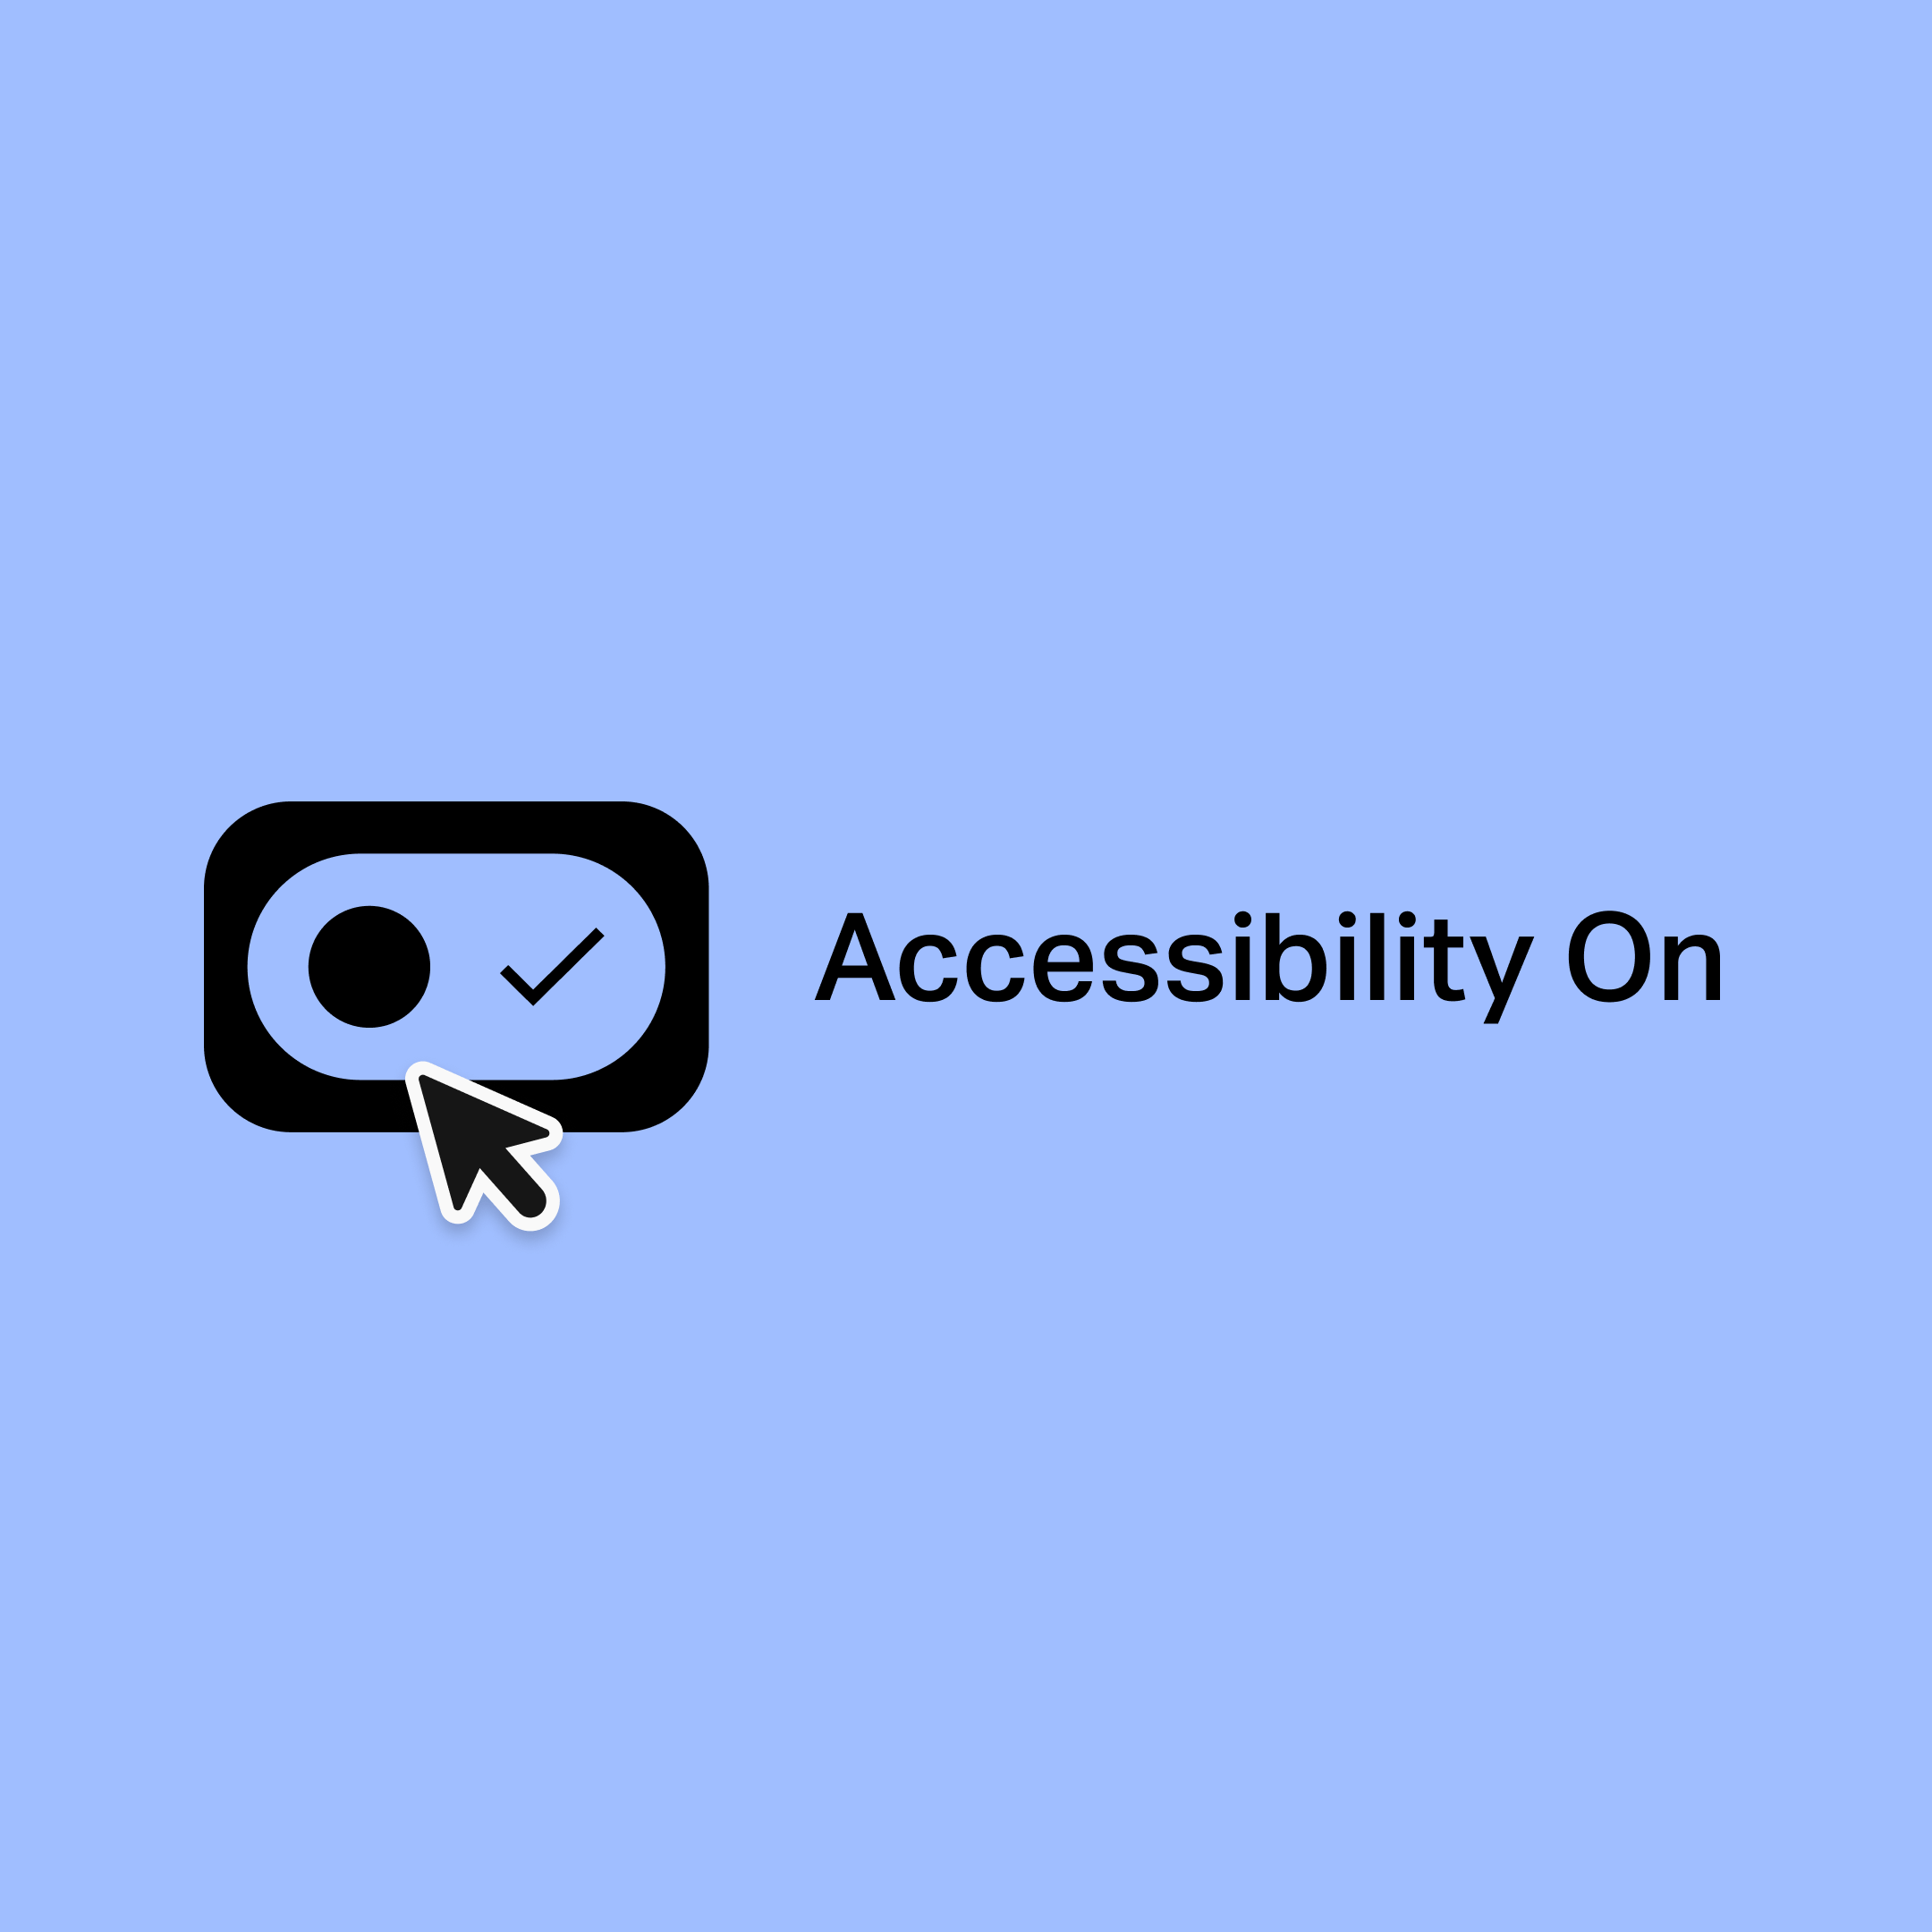 WeTransfer Advertising is committed to accessibility. Here’s why.